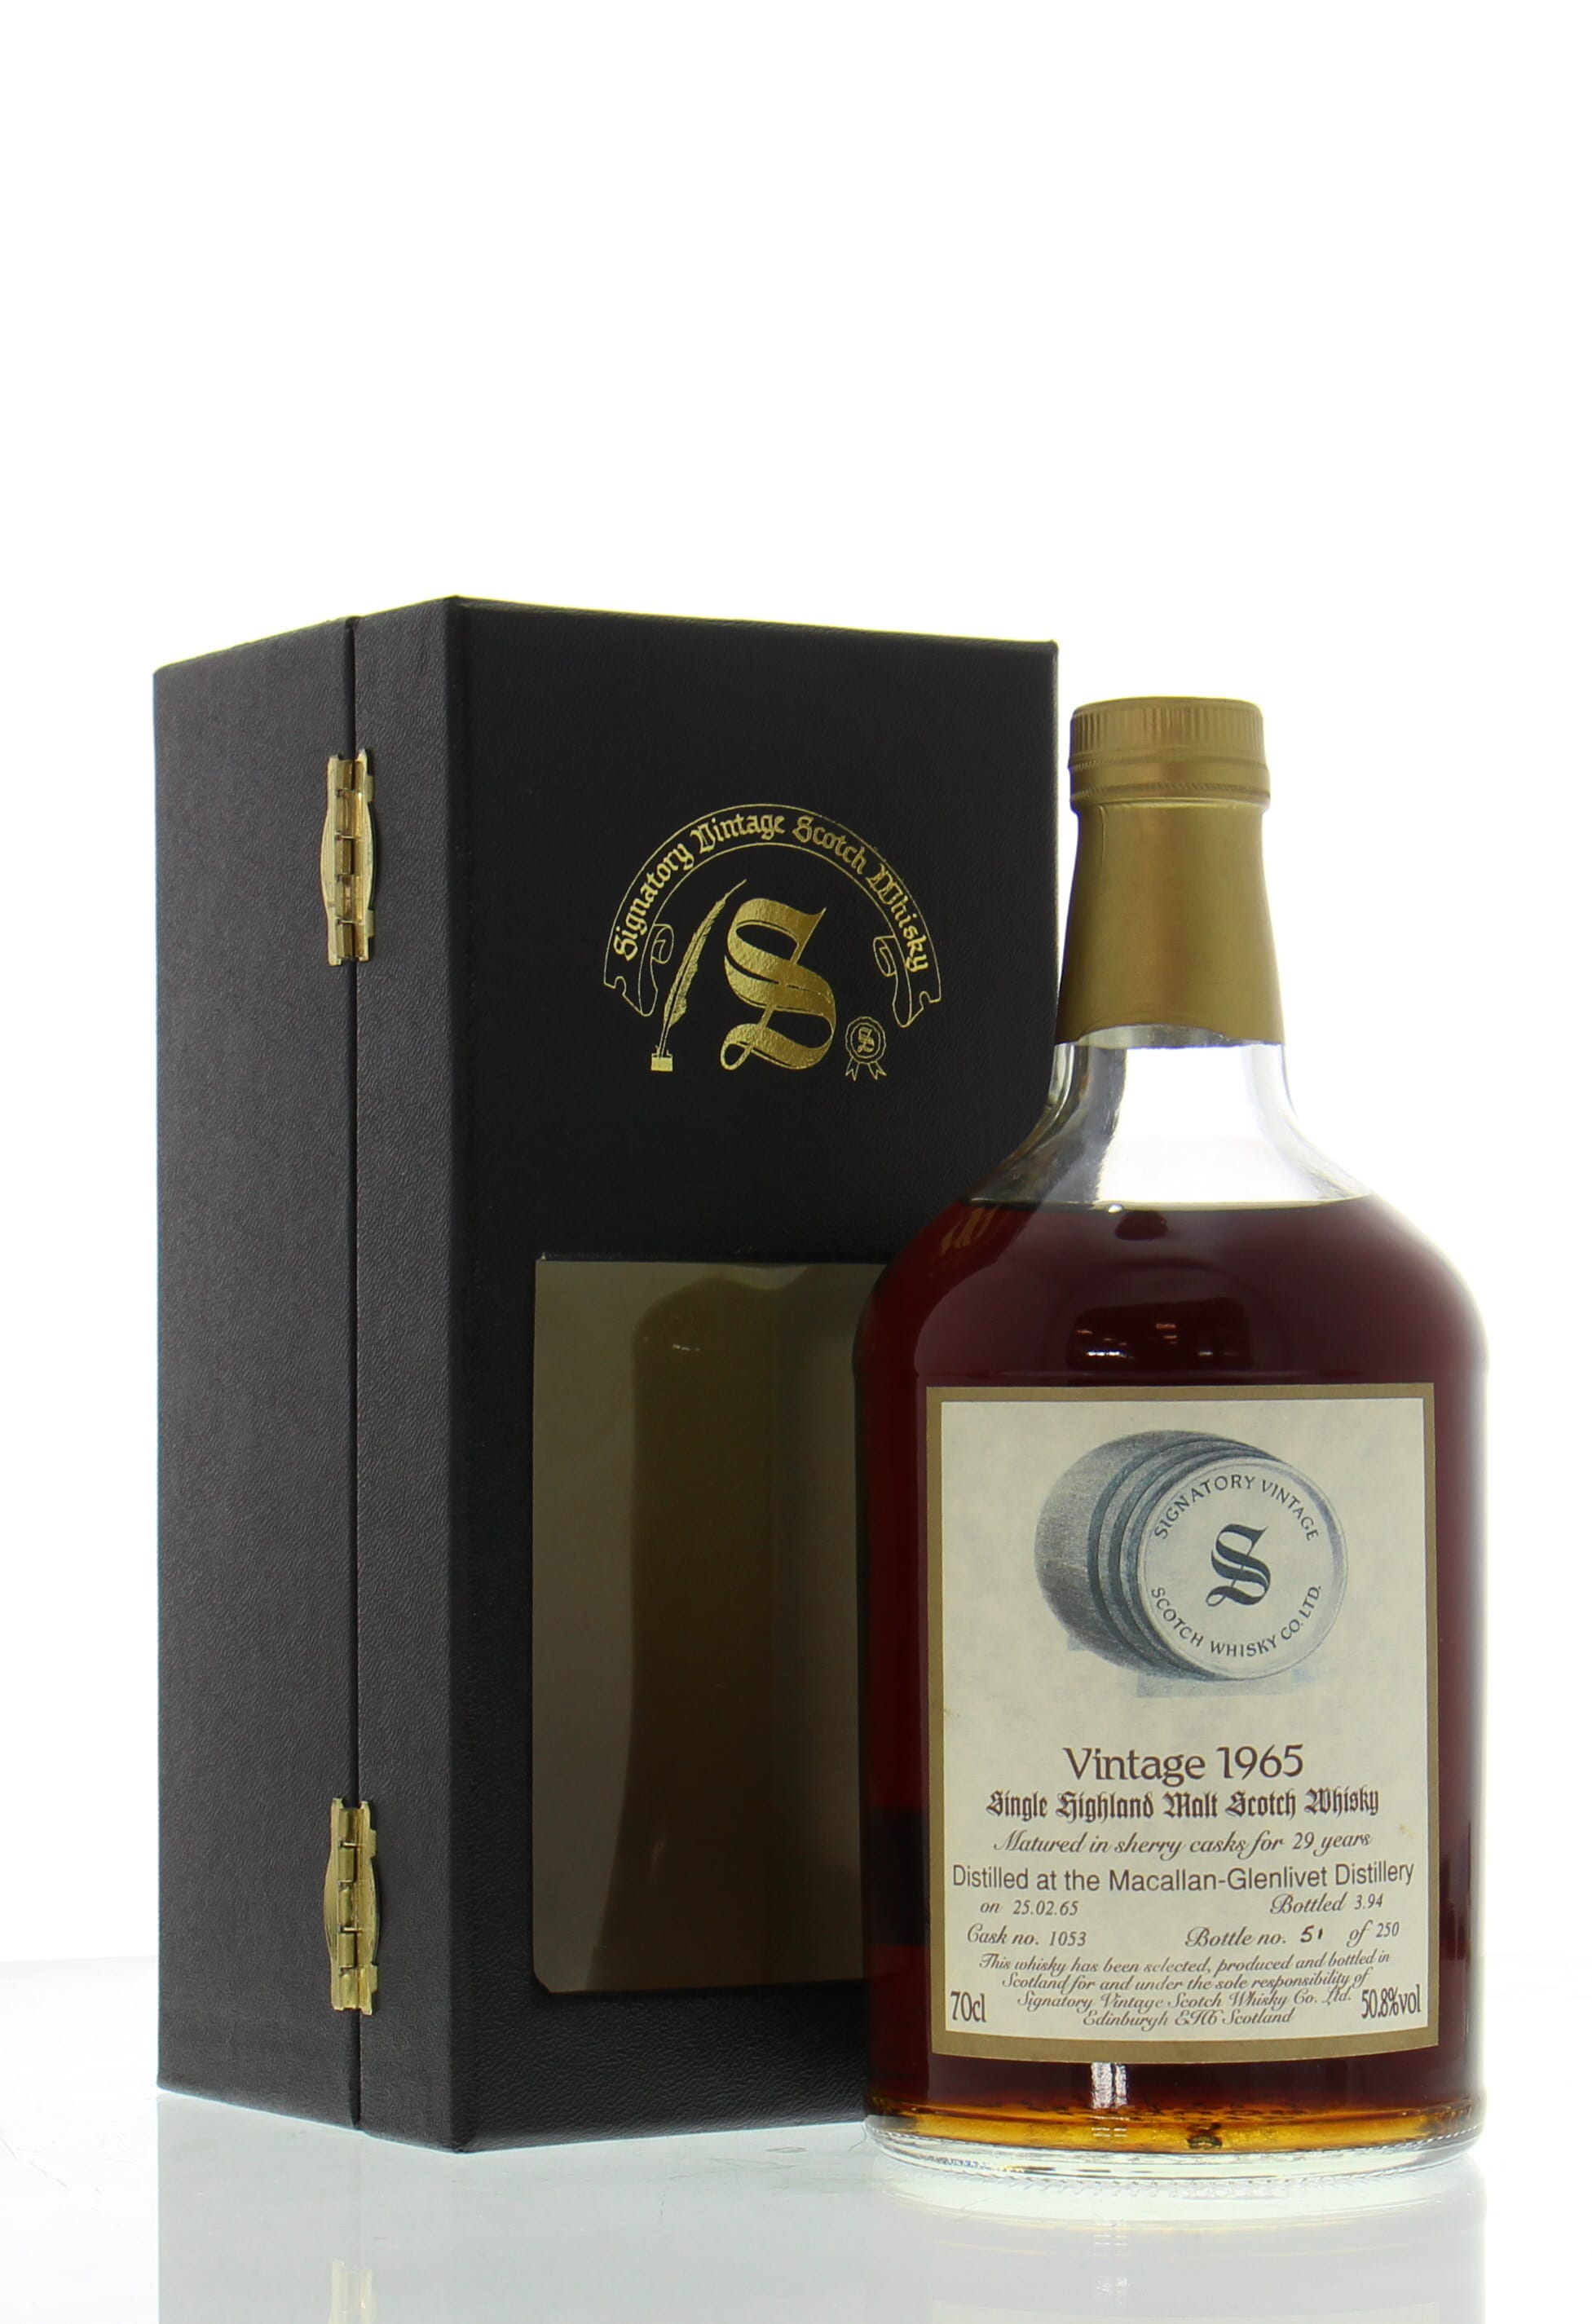 Macallan - 29 Years Old Signatory Vintage cask:1053 50.8% 1965 In Original Container